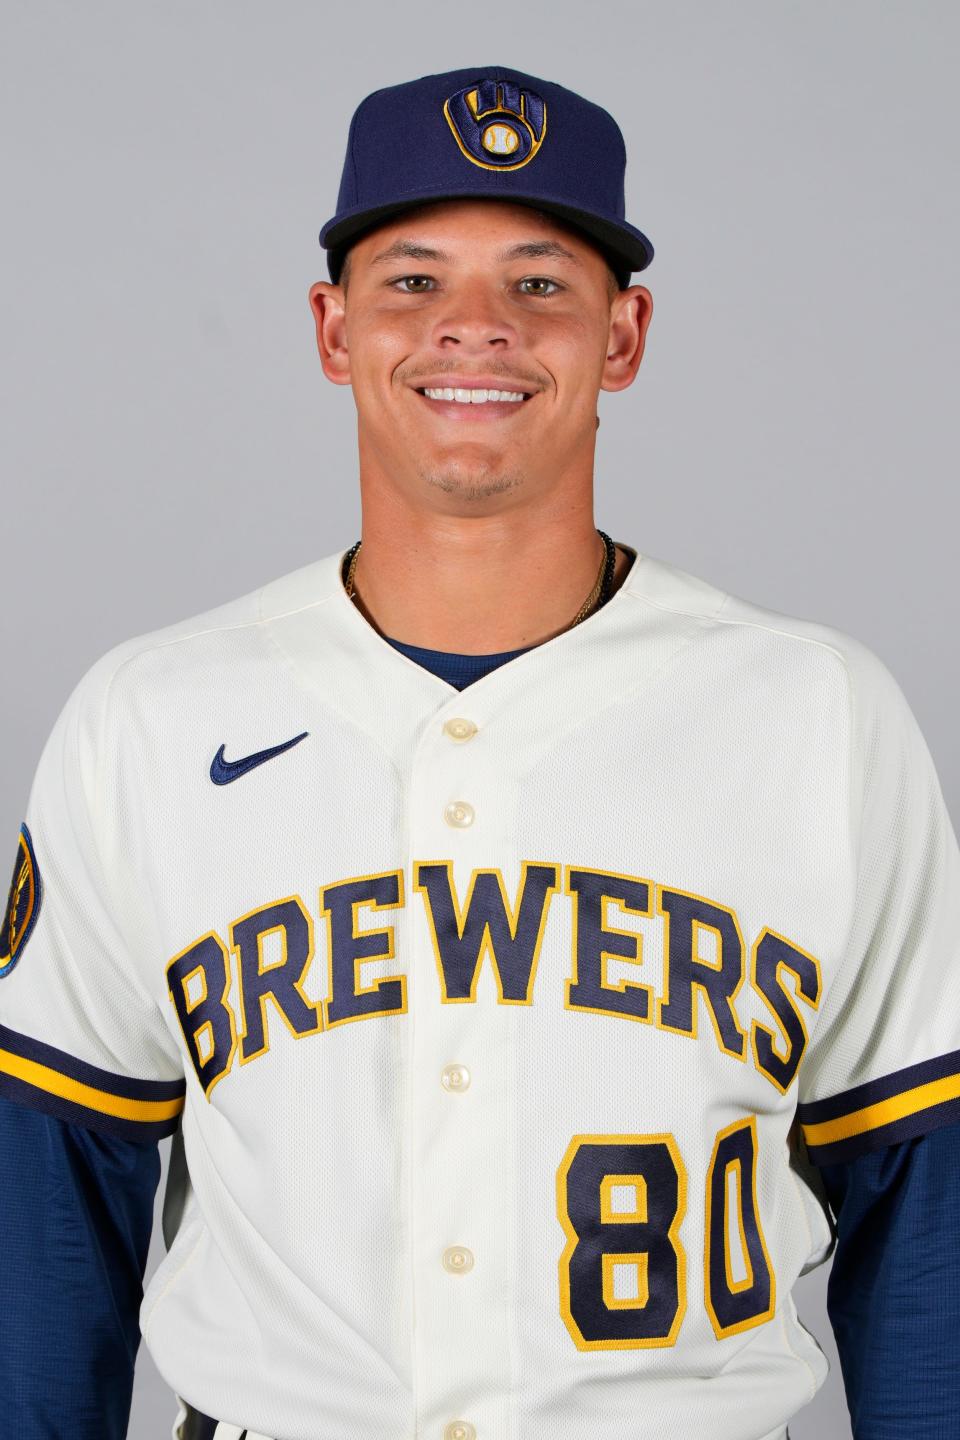 Tobias Myers has had an impressive start to the season with Class AAA Nashville. He was called up by the Brewers on Wednesday and could his MLB debut in the coming days.